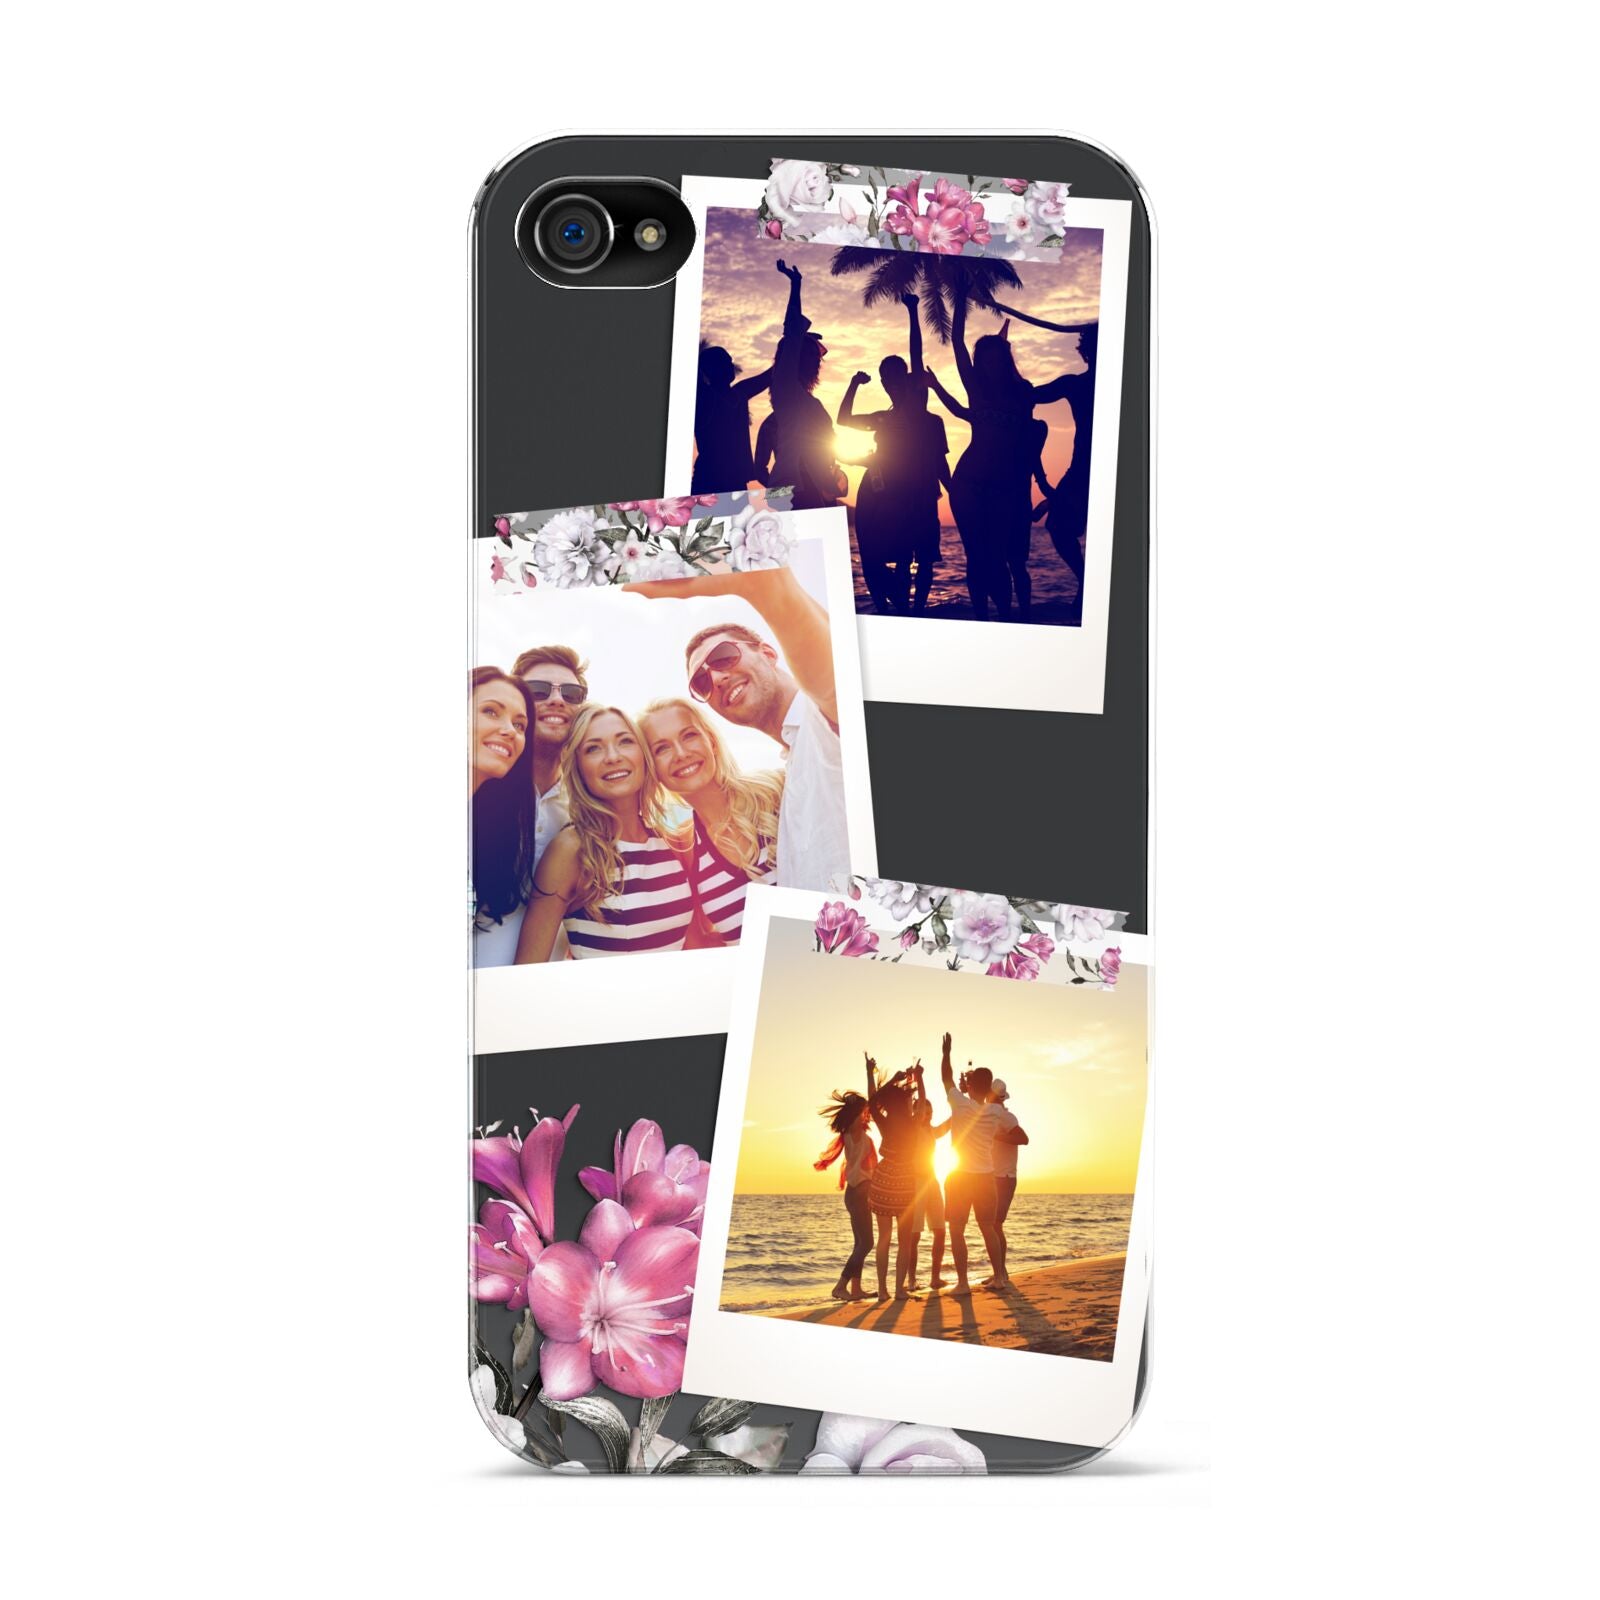 Floral Photo Montage Upload Apple iPhone 4s Case